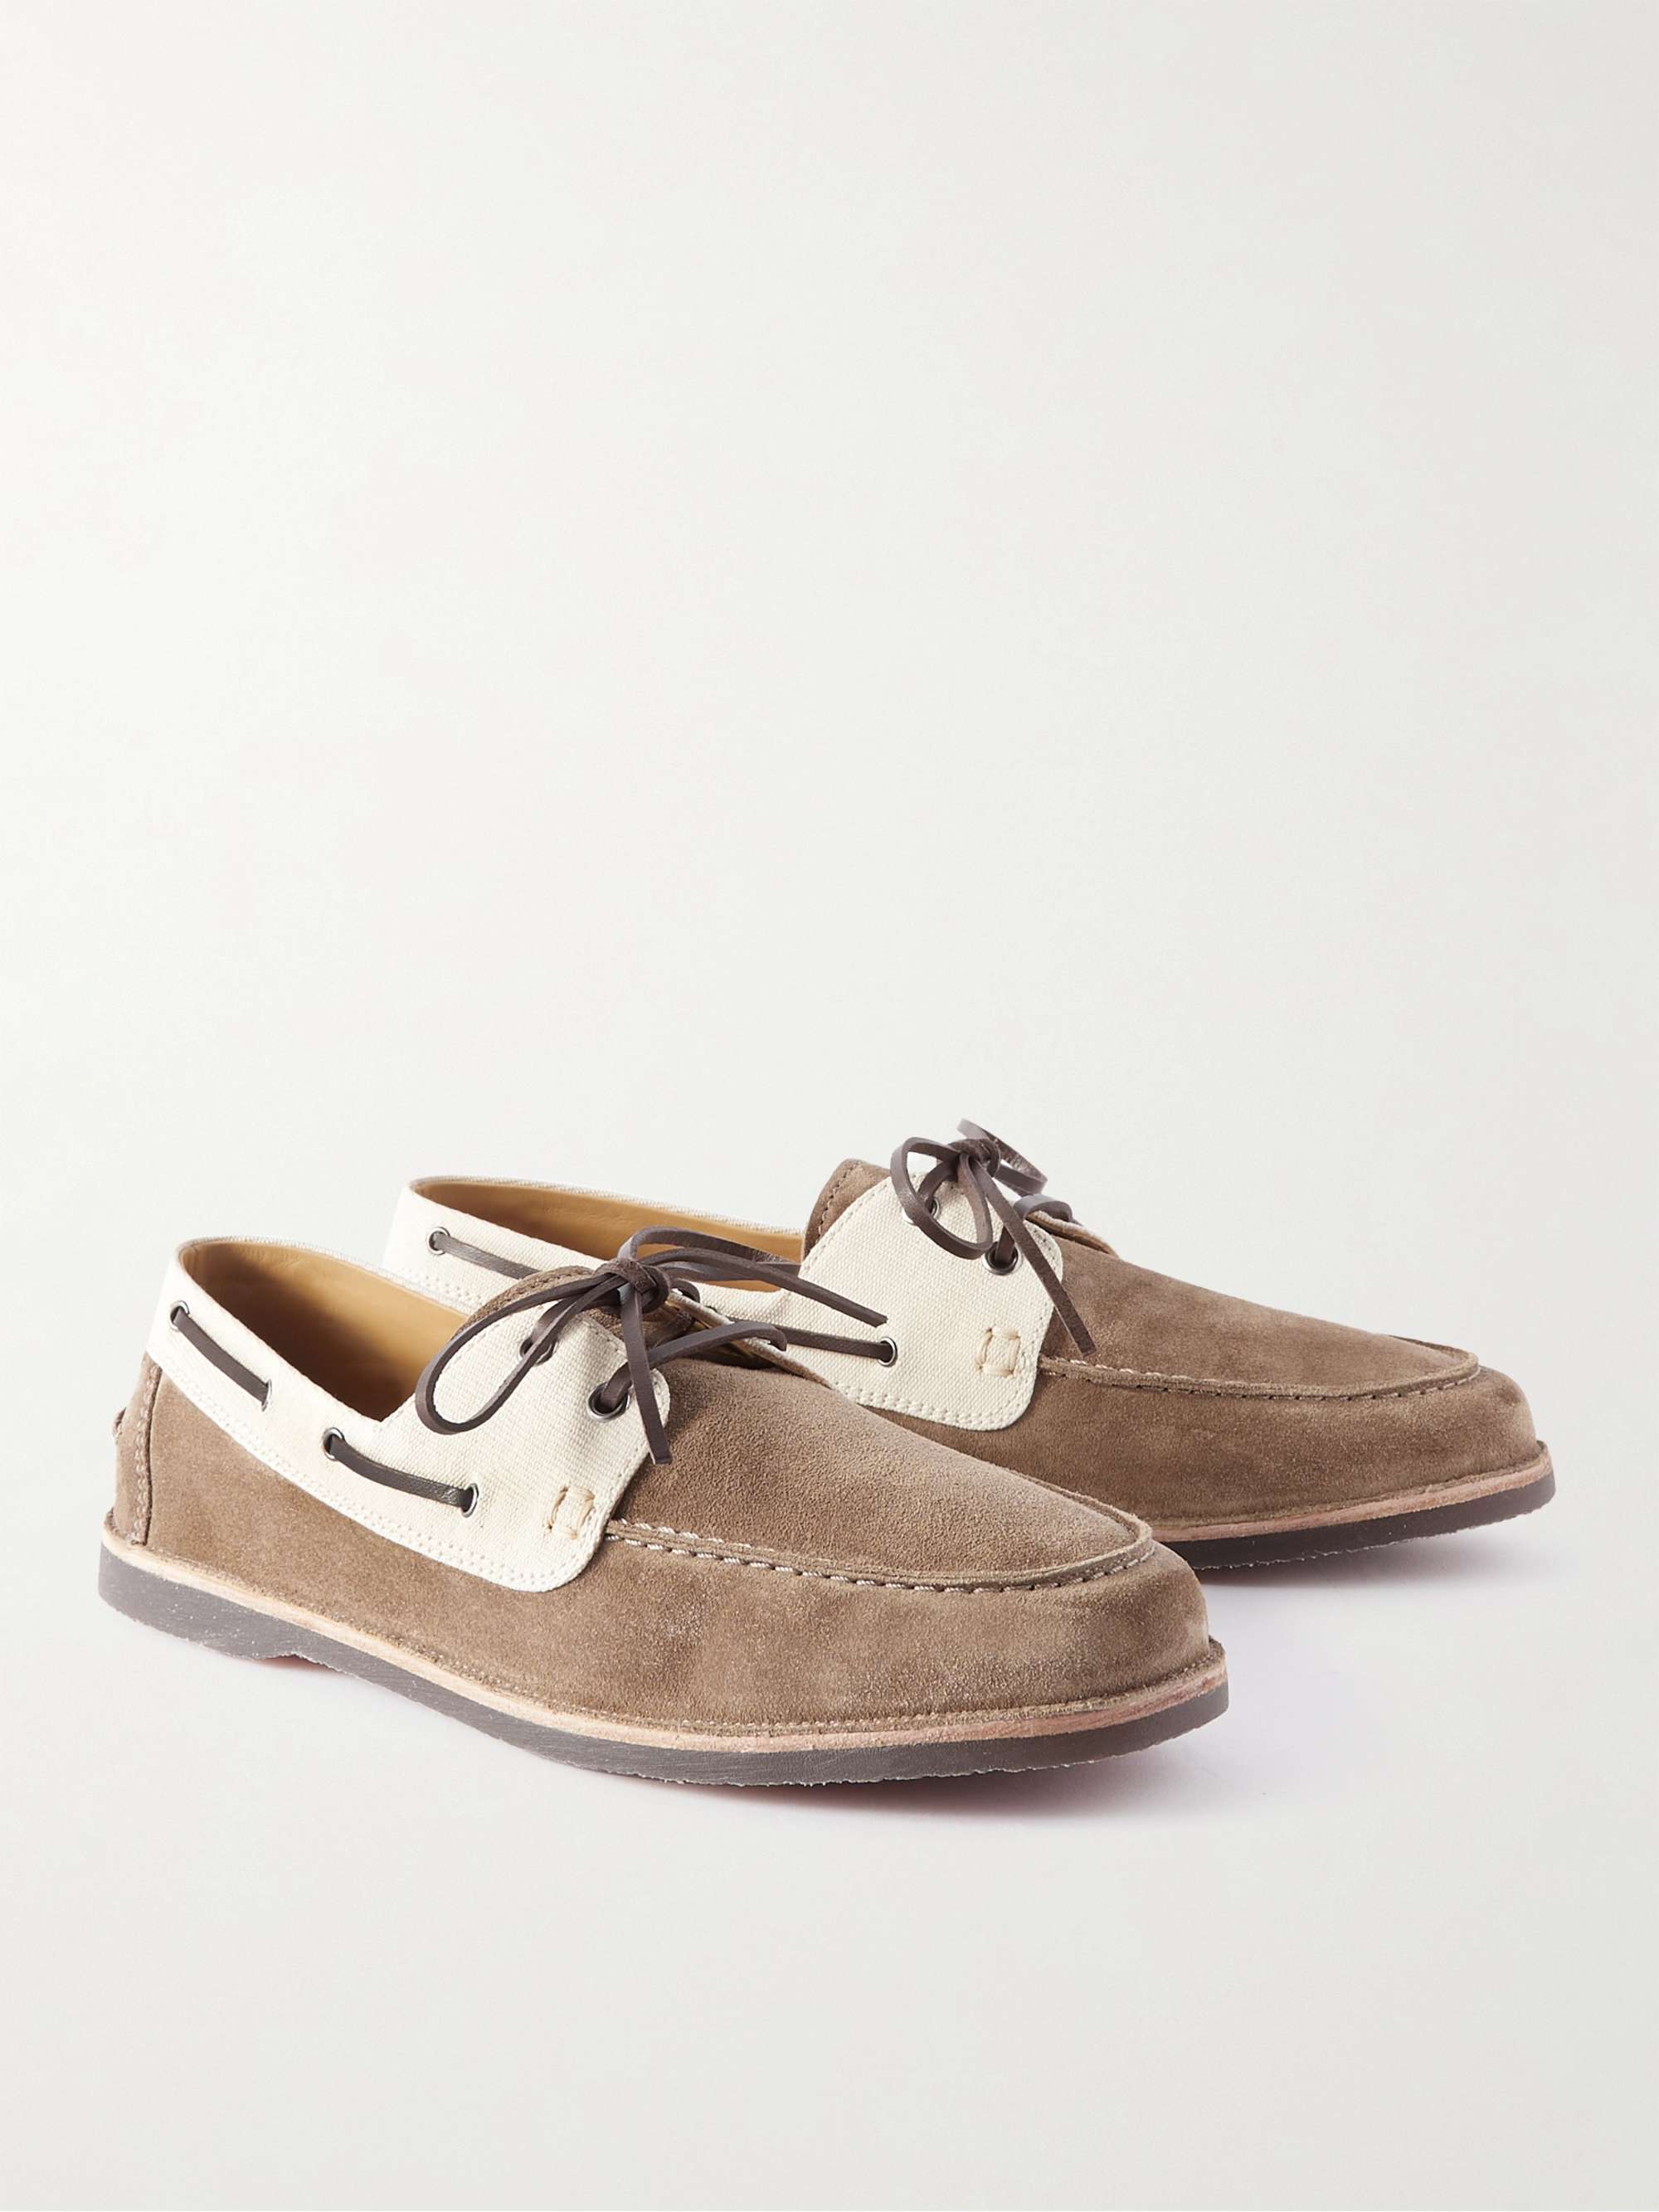 BRUNELLO CUCINELLI Canvas-Trimmed Suede Boat Shoes